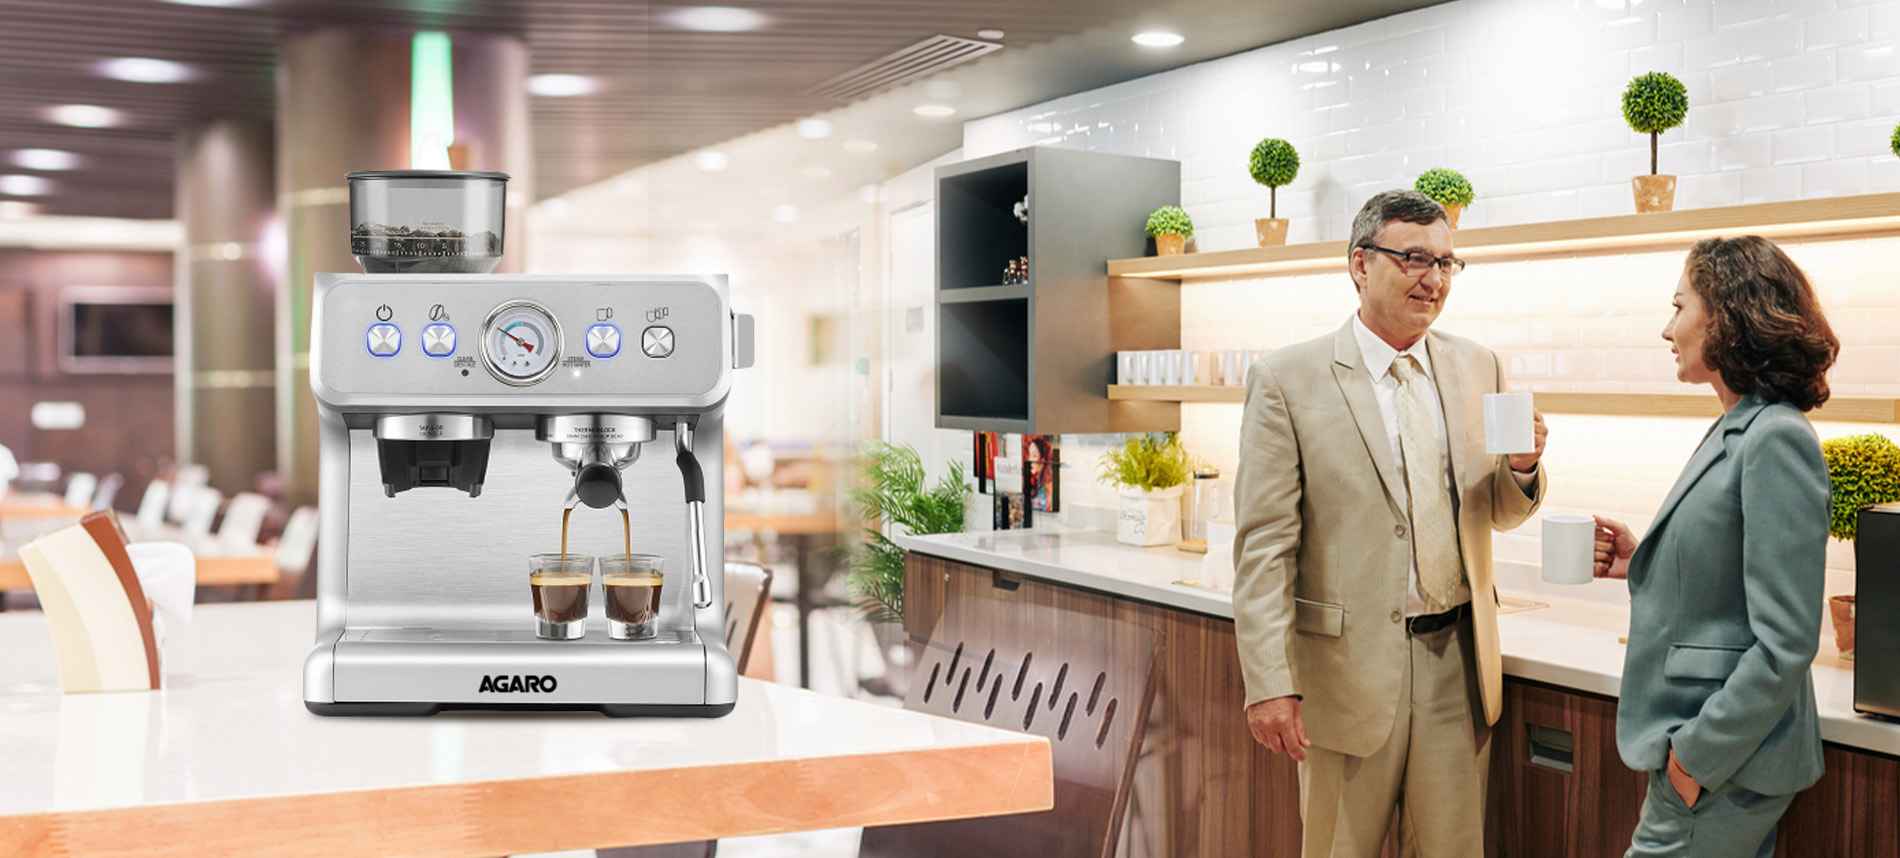 4 Common and Popular Types Of Office Coffee Machines  Office coffee  machines, Office coffee, Ground coffee machine